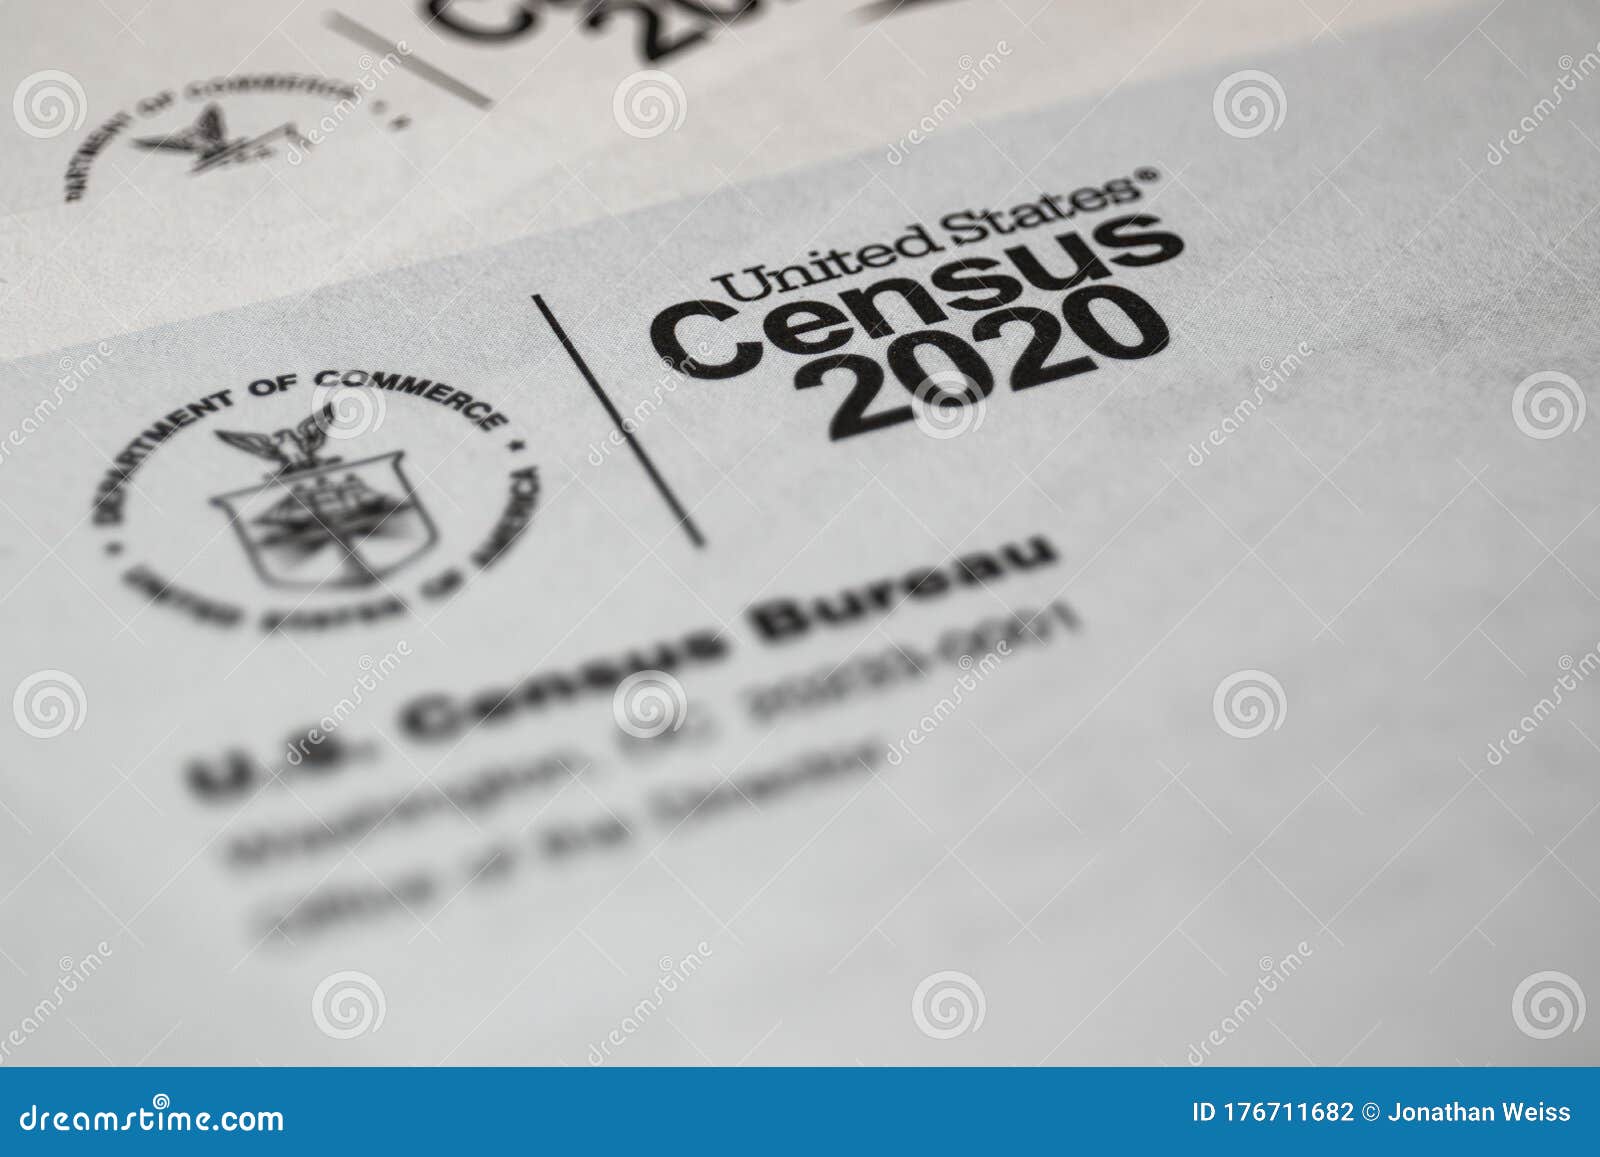 census 2020 form. the census is the procedure of systematically acquiring and recording information about the population.